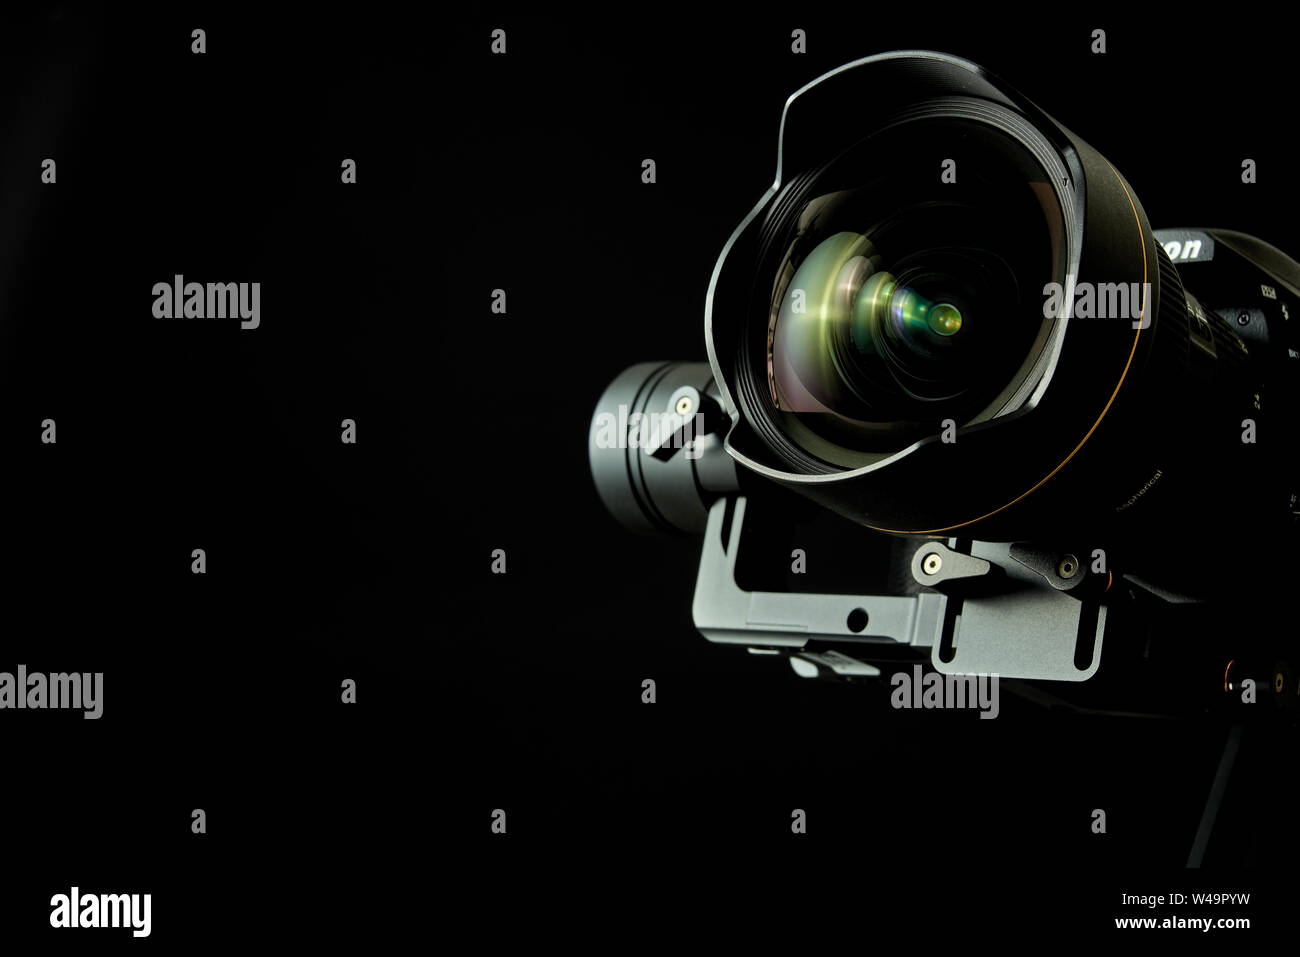 Close-up of wide angle lens in a dsl camera and gimbal stabilizer, with low-key lighting and a black background Stock Photo